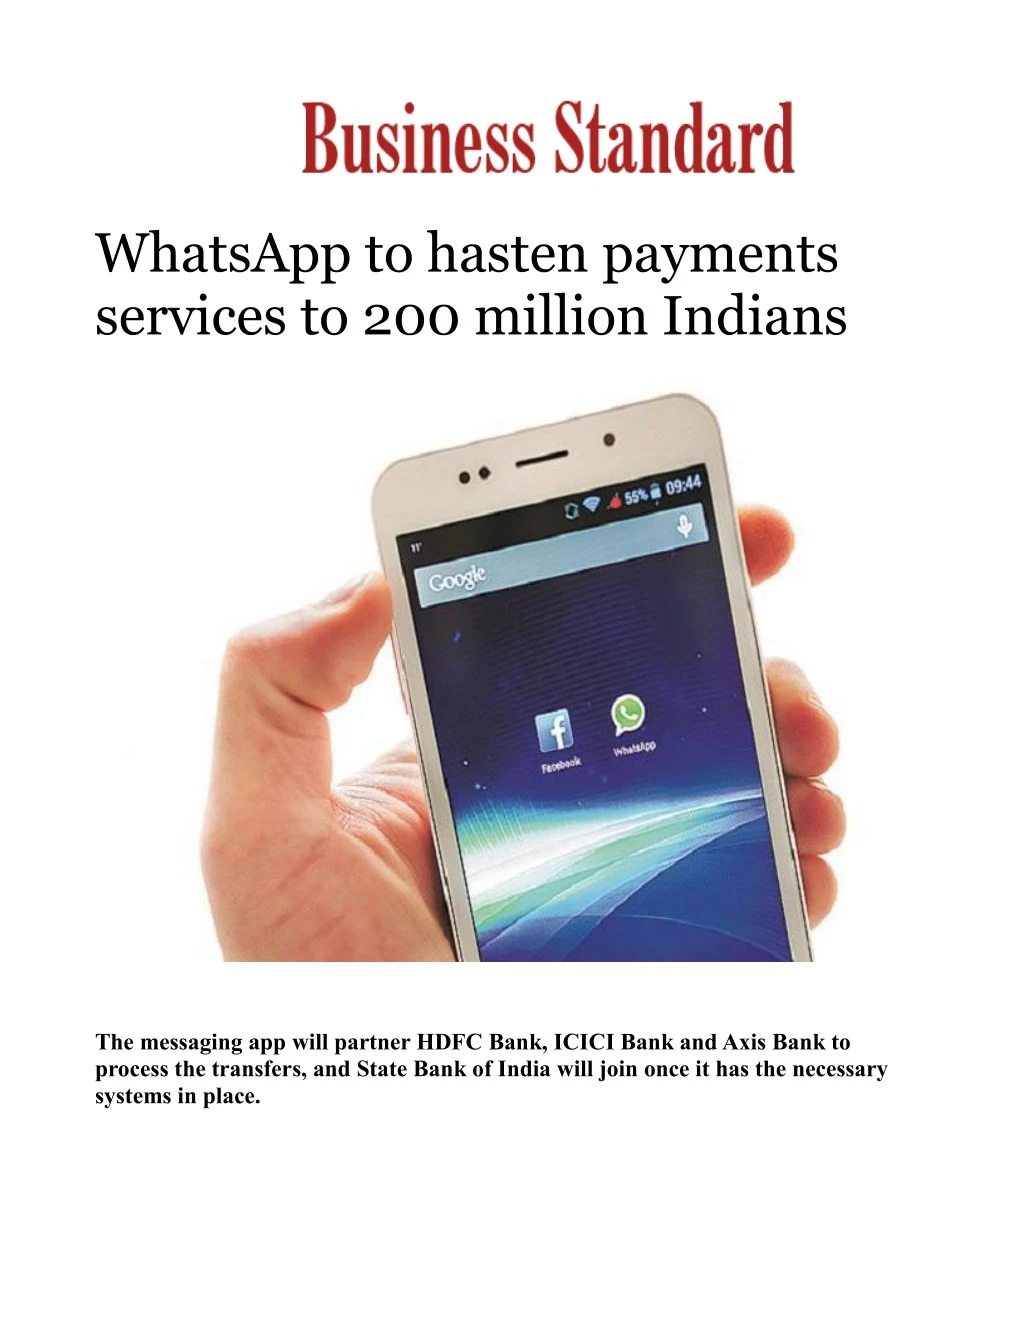 whatsapp to hasten payments services